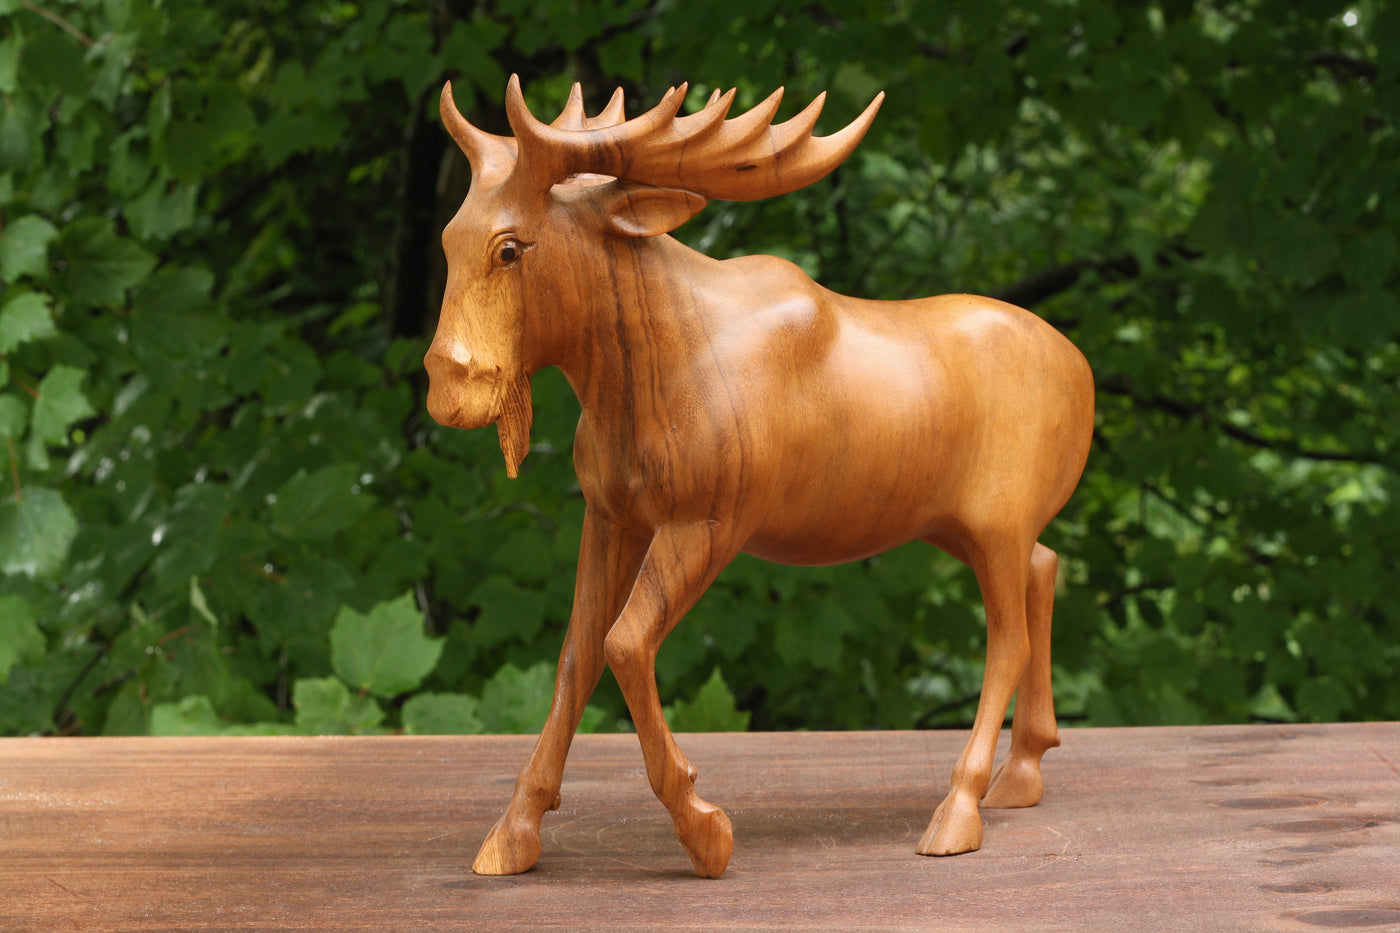 Wooden Hand Carved Moose Statue Figurine Sculpture Art Elk Decorative Home Decor Accent Rustic Lodge Handmade Handcrafted Decoration